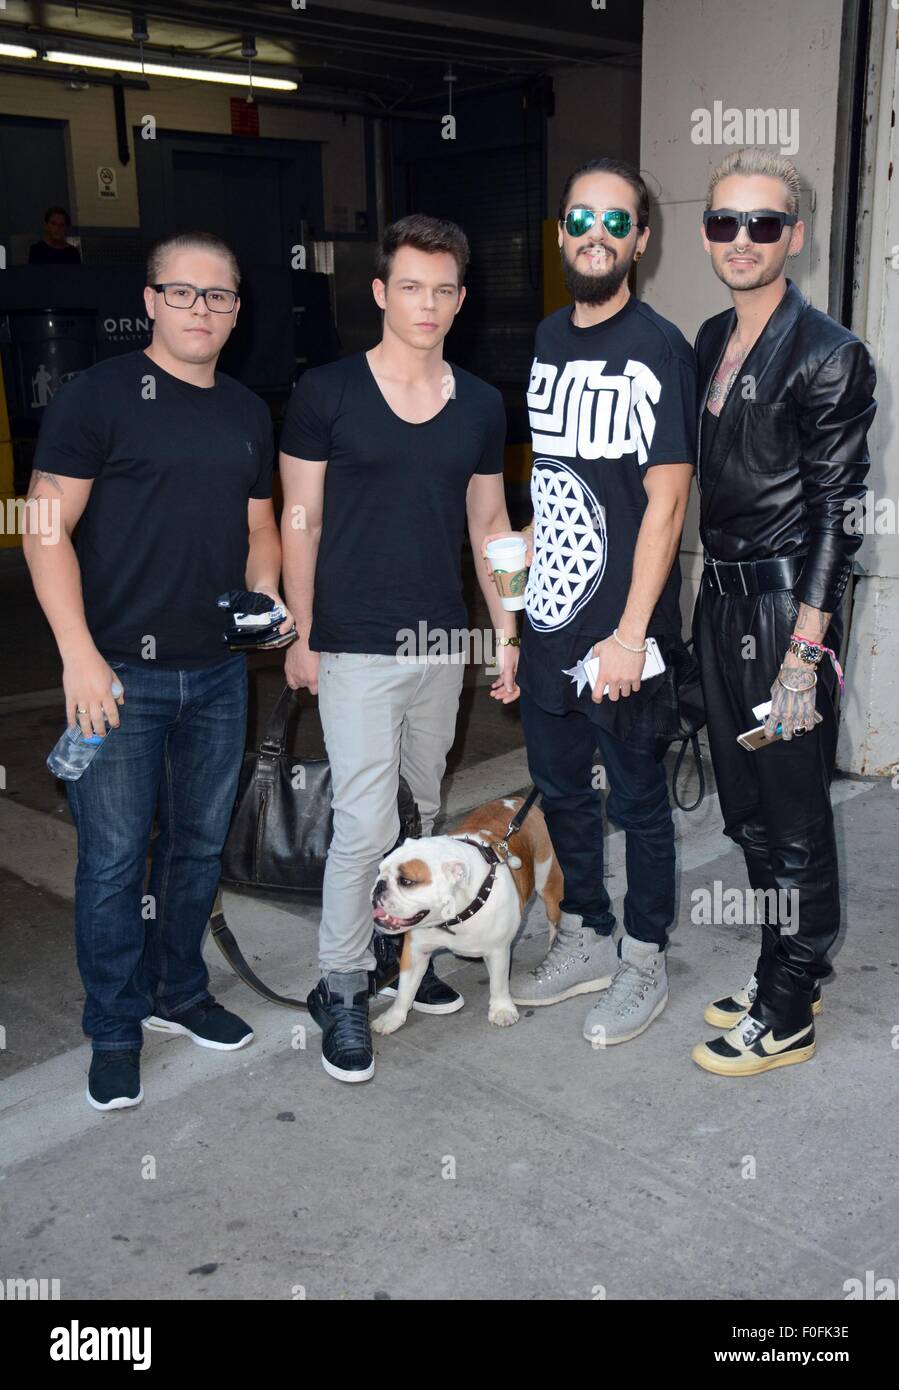 New York, NY, USA. 14th Aug, 2015. Tokio Hotel: Gustav Scha?fer, Georg Listing, Tom Kaulitz, Bill Kaulitz (and Bill's dog Pumba) out and about for Celebrity Candids - FRI, New York, NY August 14, 2015. Credit:  Derek Storm/Everett Collection/Alamy Live News Stock Photo